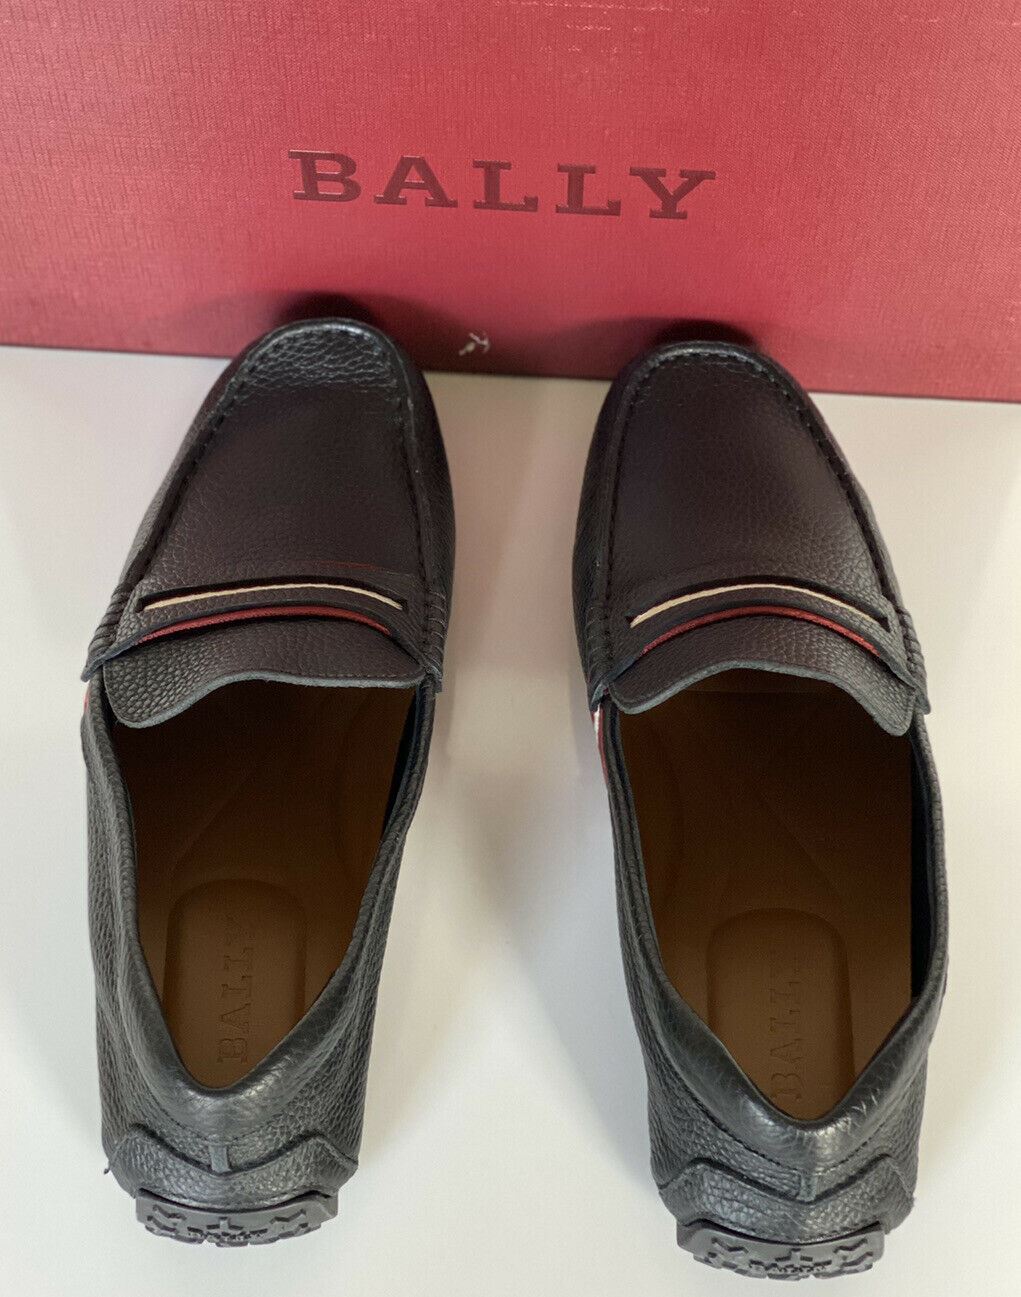 NIB Bally Mens Bovine Grained Leather Driver Shoes Black 8.5 D US 6228298 Italy